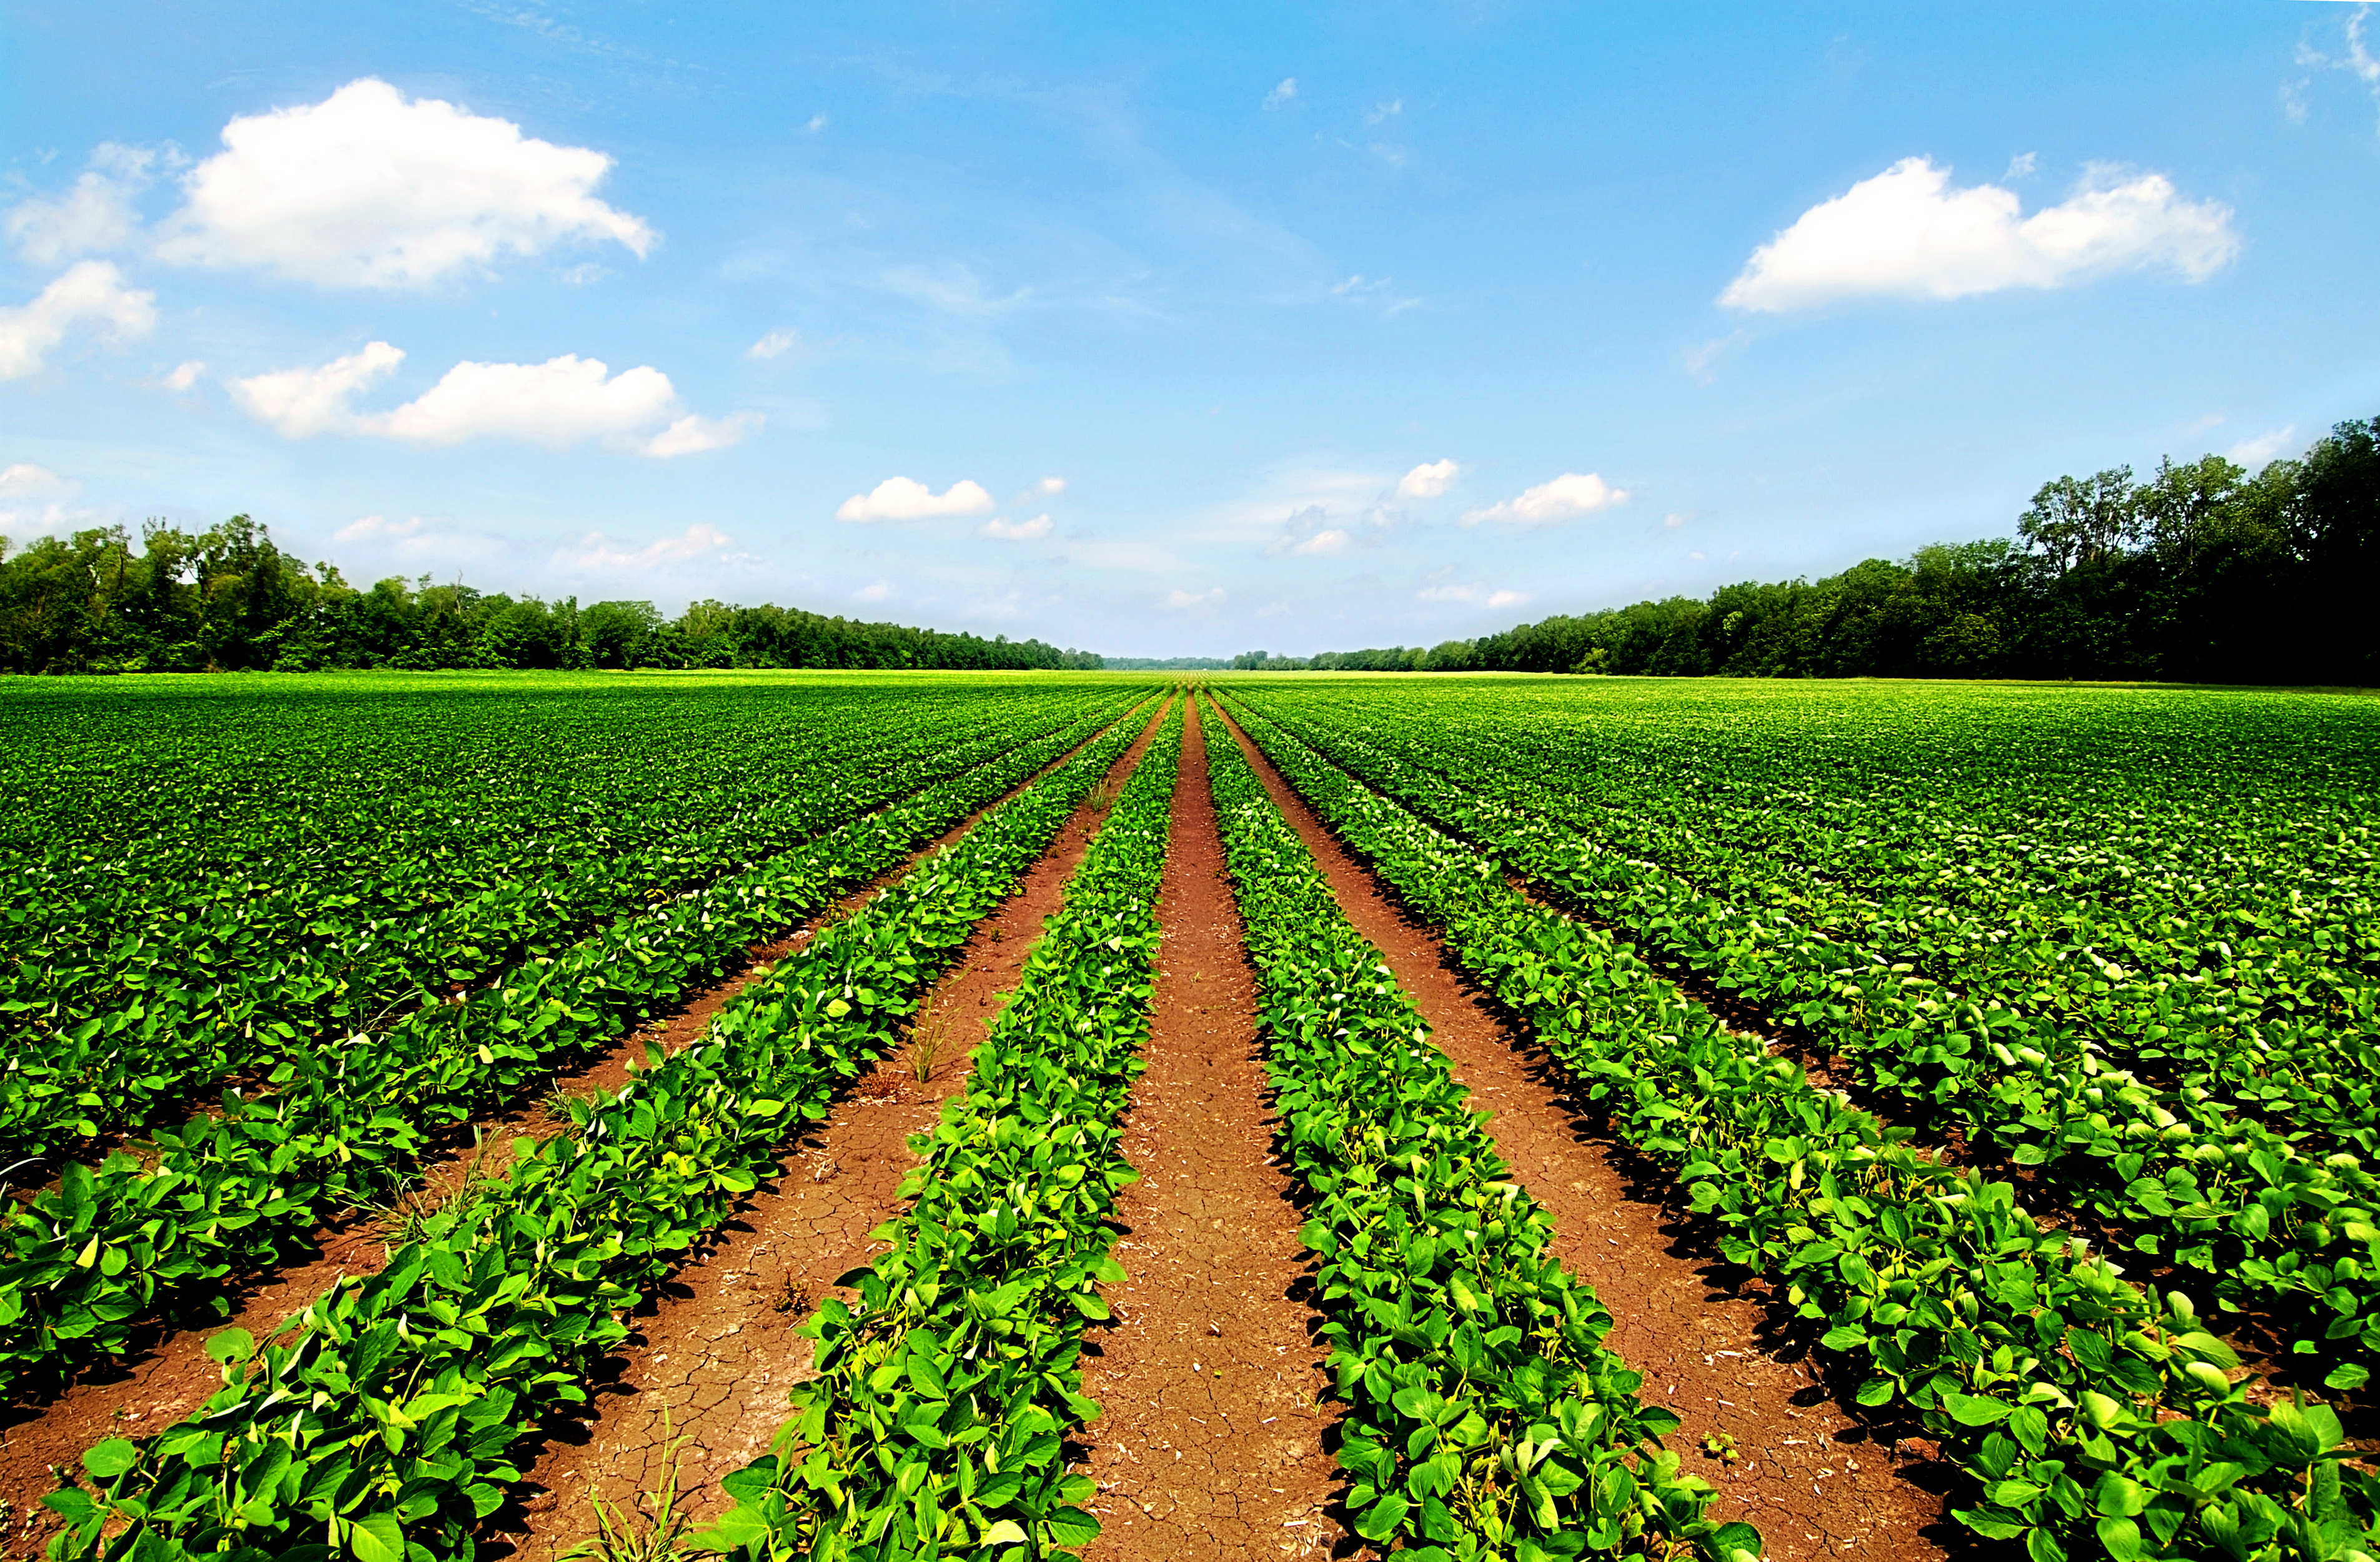 Agricultural Land | Farms for Sale | Land Agents | Lincolnshire